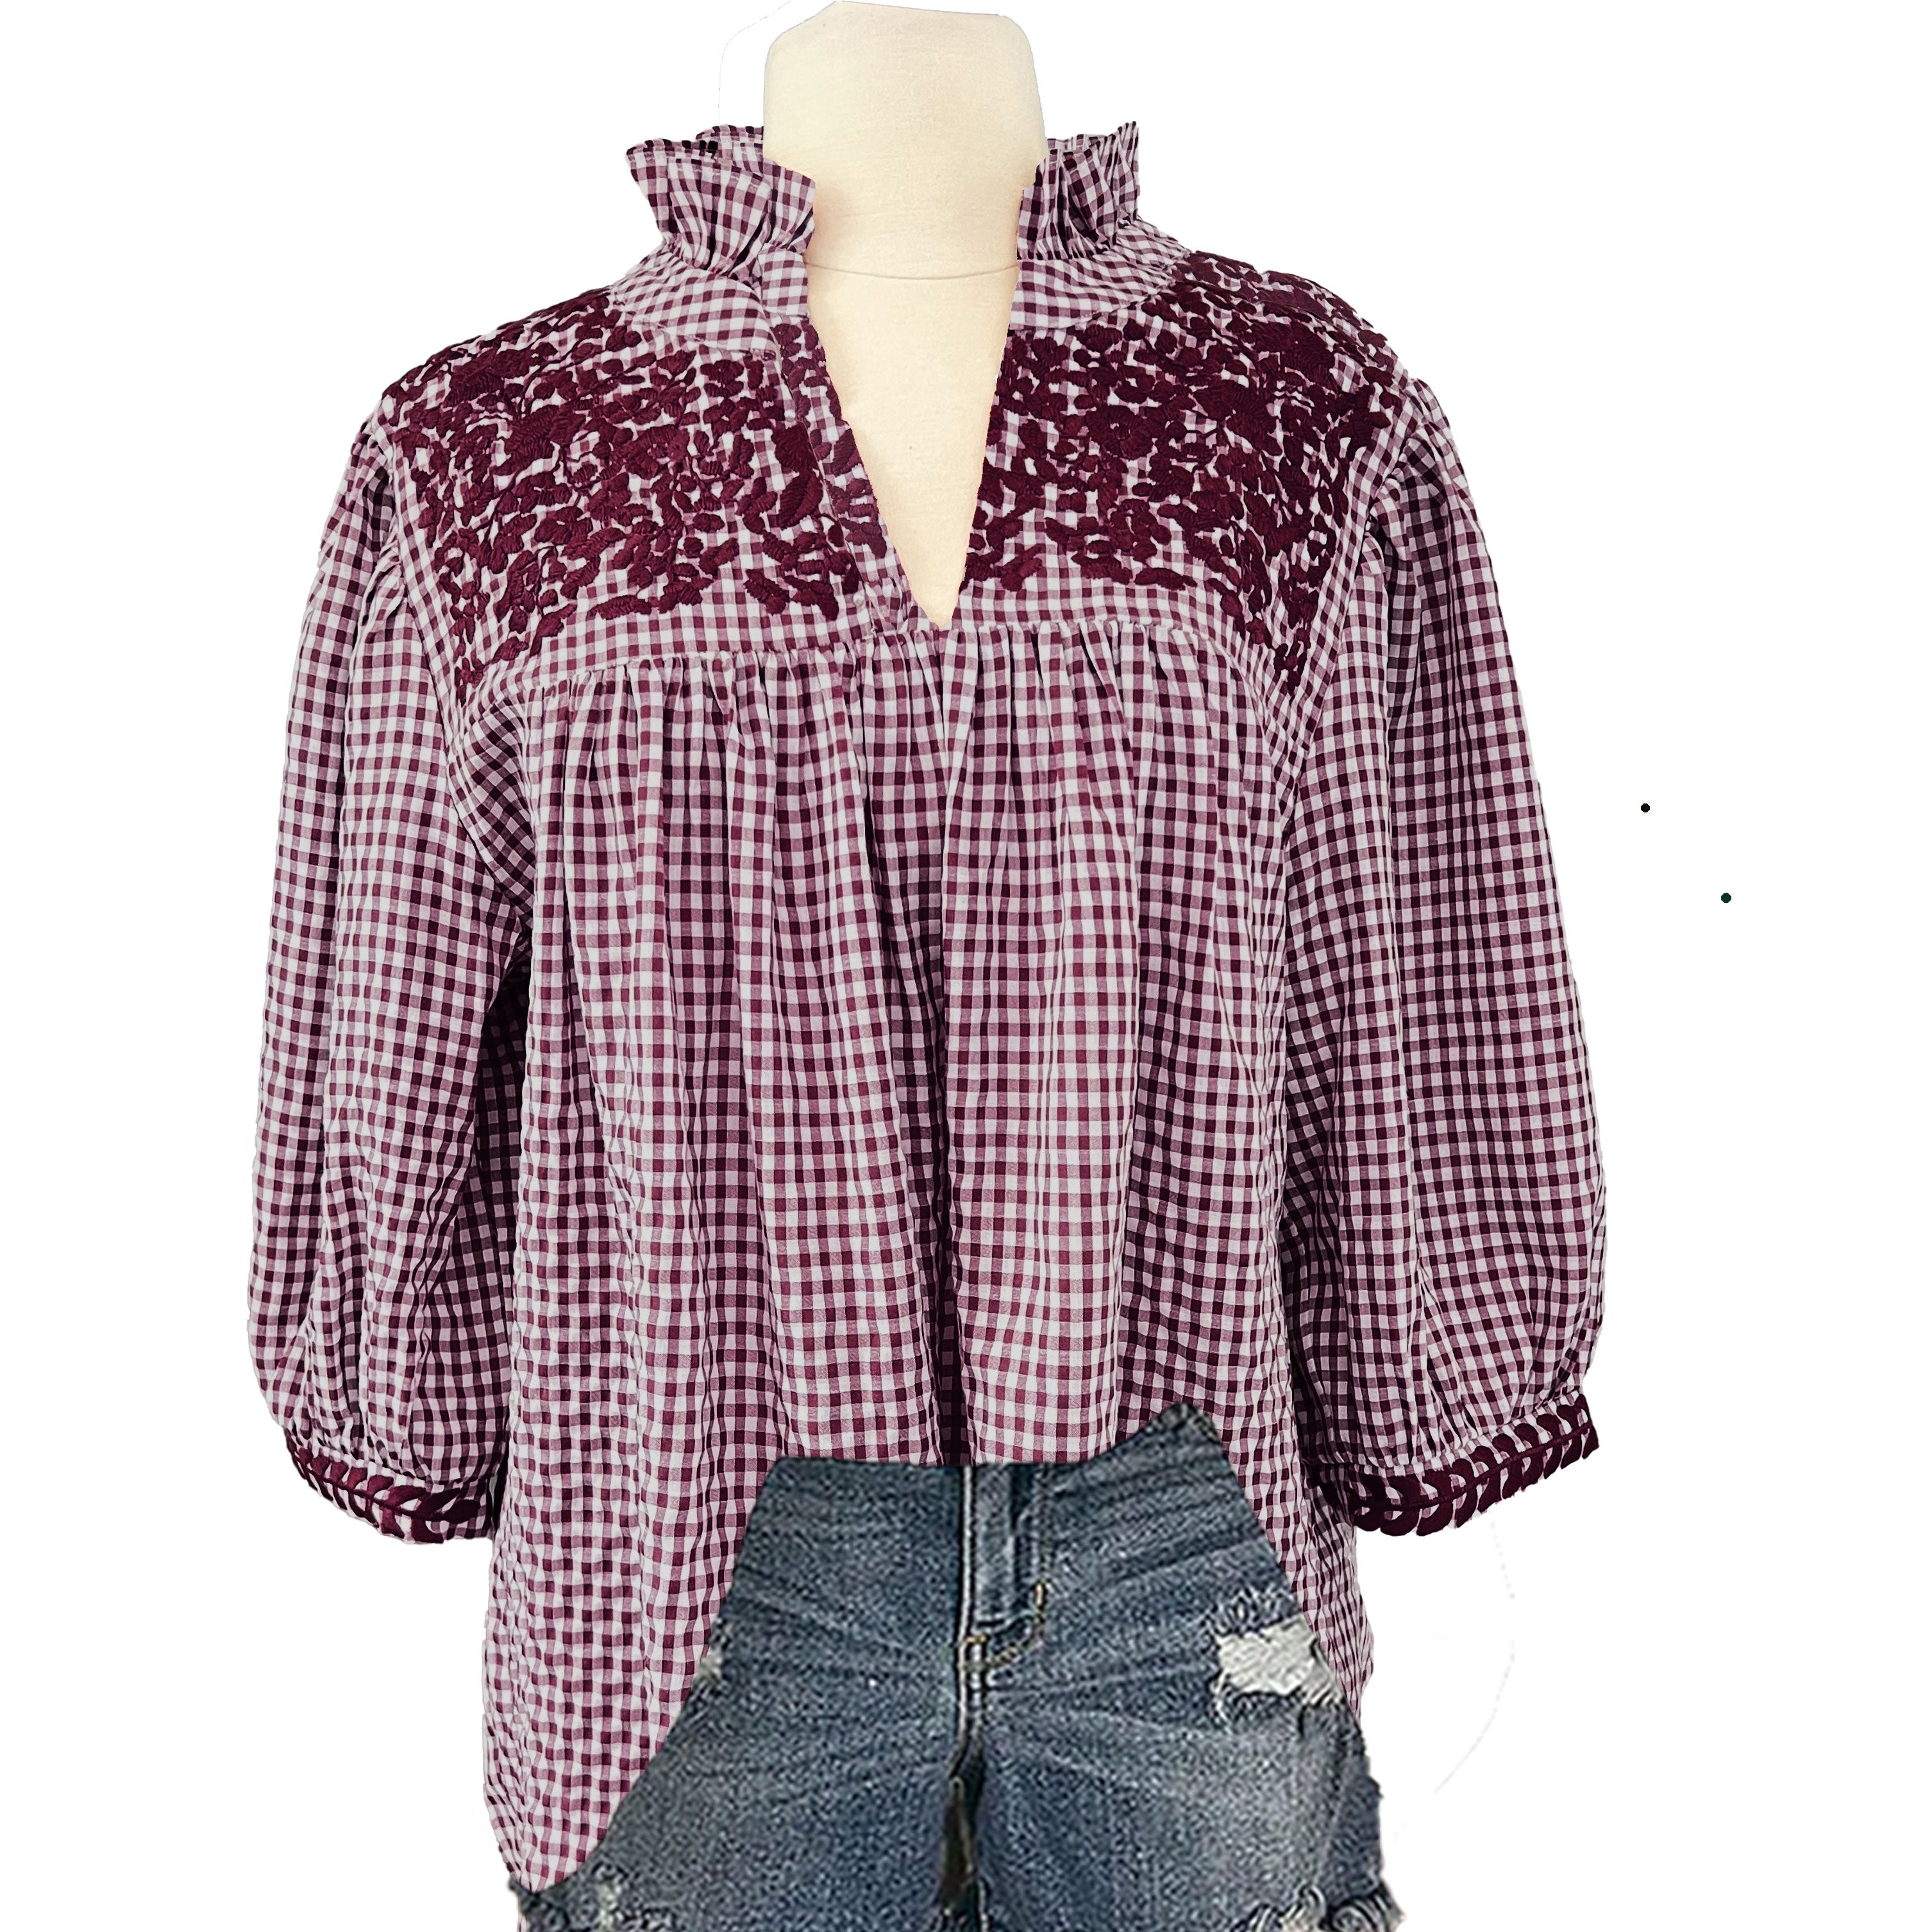 Aggie Gingham Tailgater Blouse (XL only)